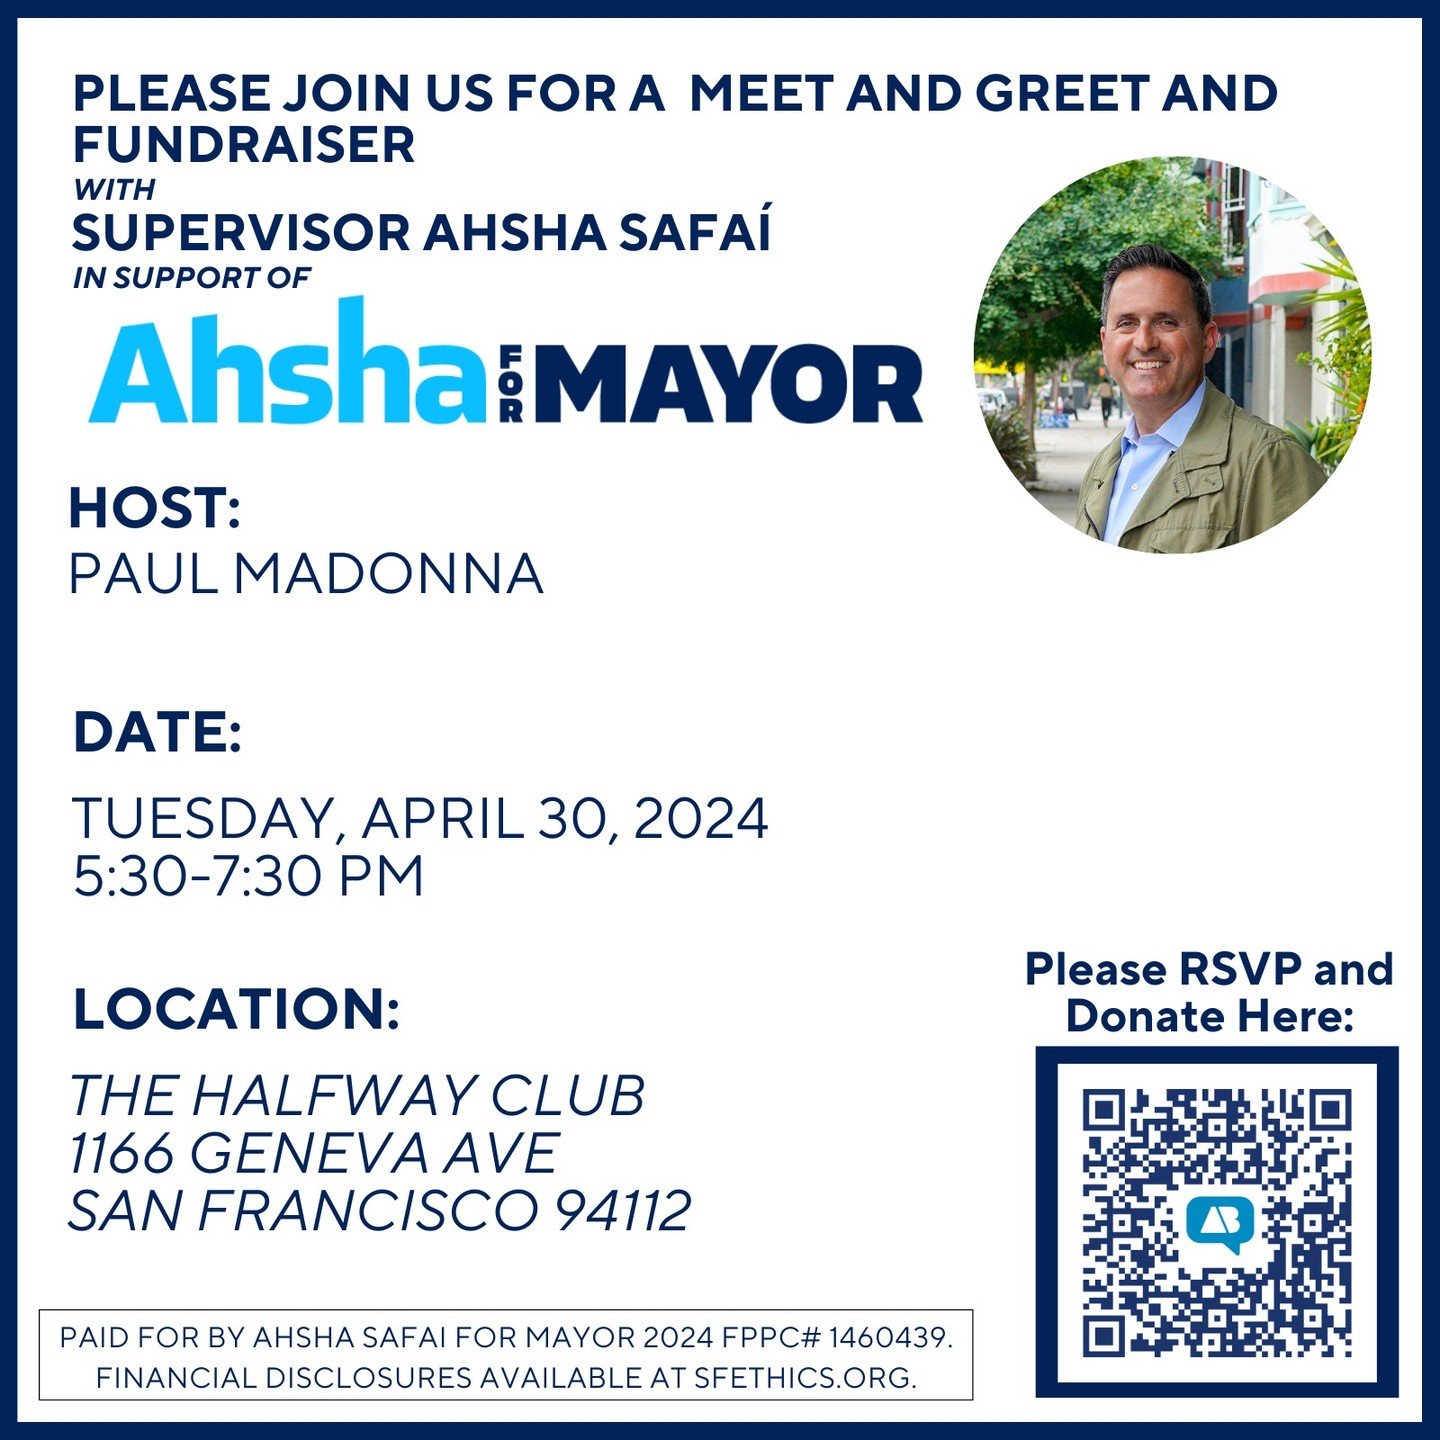 This coming Tuesday is going to be a great day to swing by The Halfway Club!

We're excited to host our District 11 Supervisor and Mayoral Candidate Ahsha Safai for a casual meet and greet event hosted by renowned local artist Paul Madonna. Trivia Tu